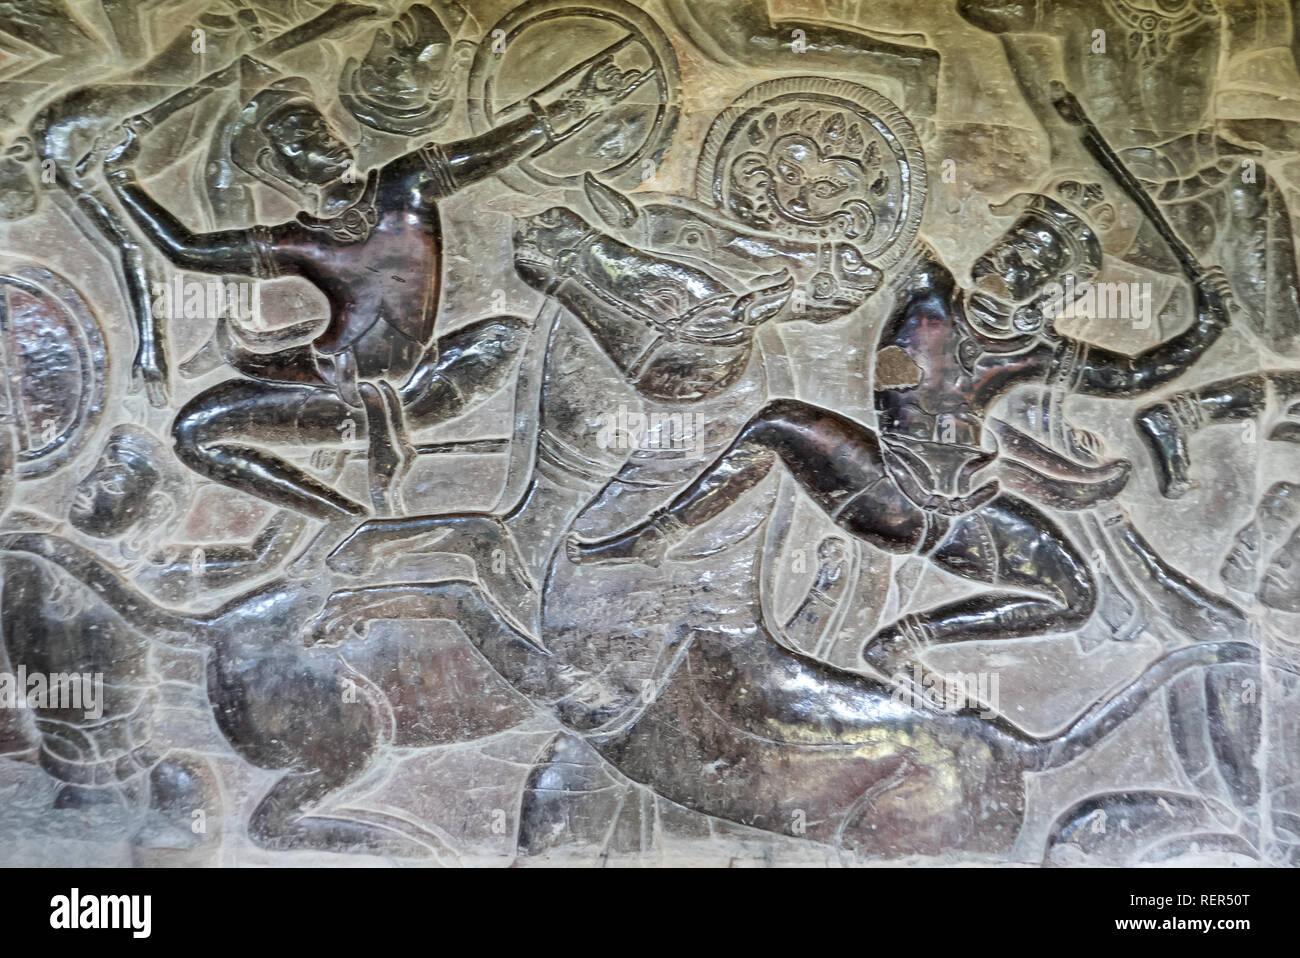 Warriors on horseback in the bas-relief frieze depicting Krishna's Victory over Bana on the north gallery wall, Angkor Wat, Siem Reap, Cambodia Stock Photo